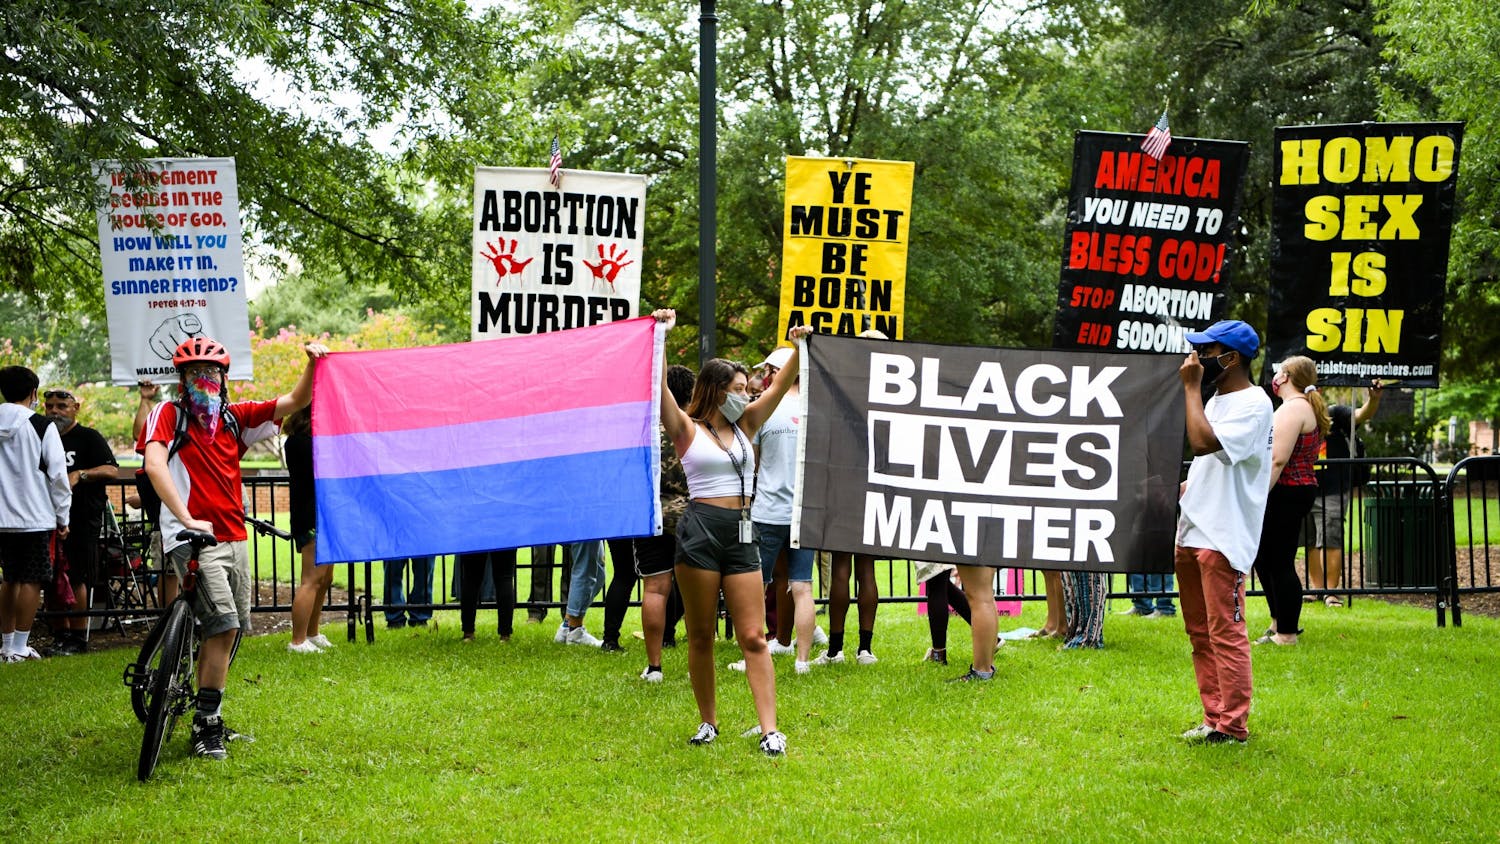 University of South Carolina students hold a transgender pride flag and a Black Lives Matter flag in front of protestors on campus on Aug. 26, 2020.